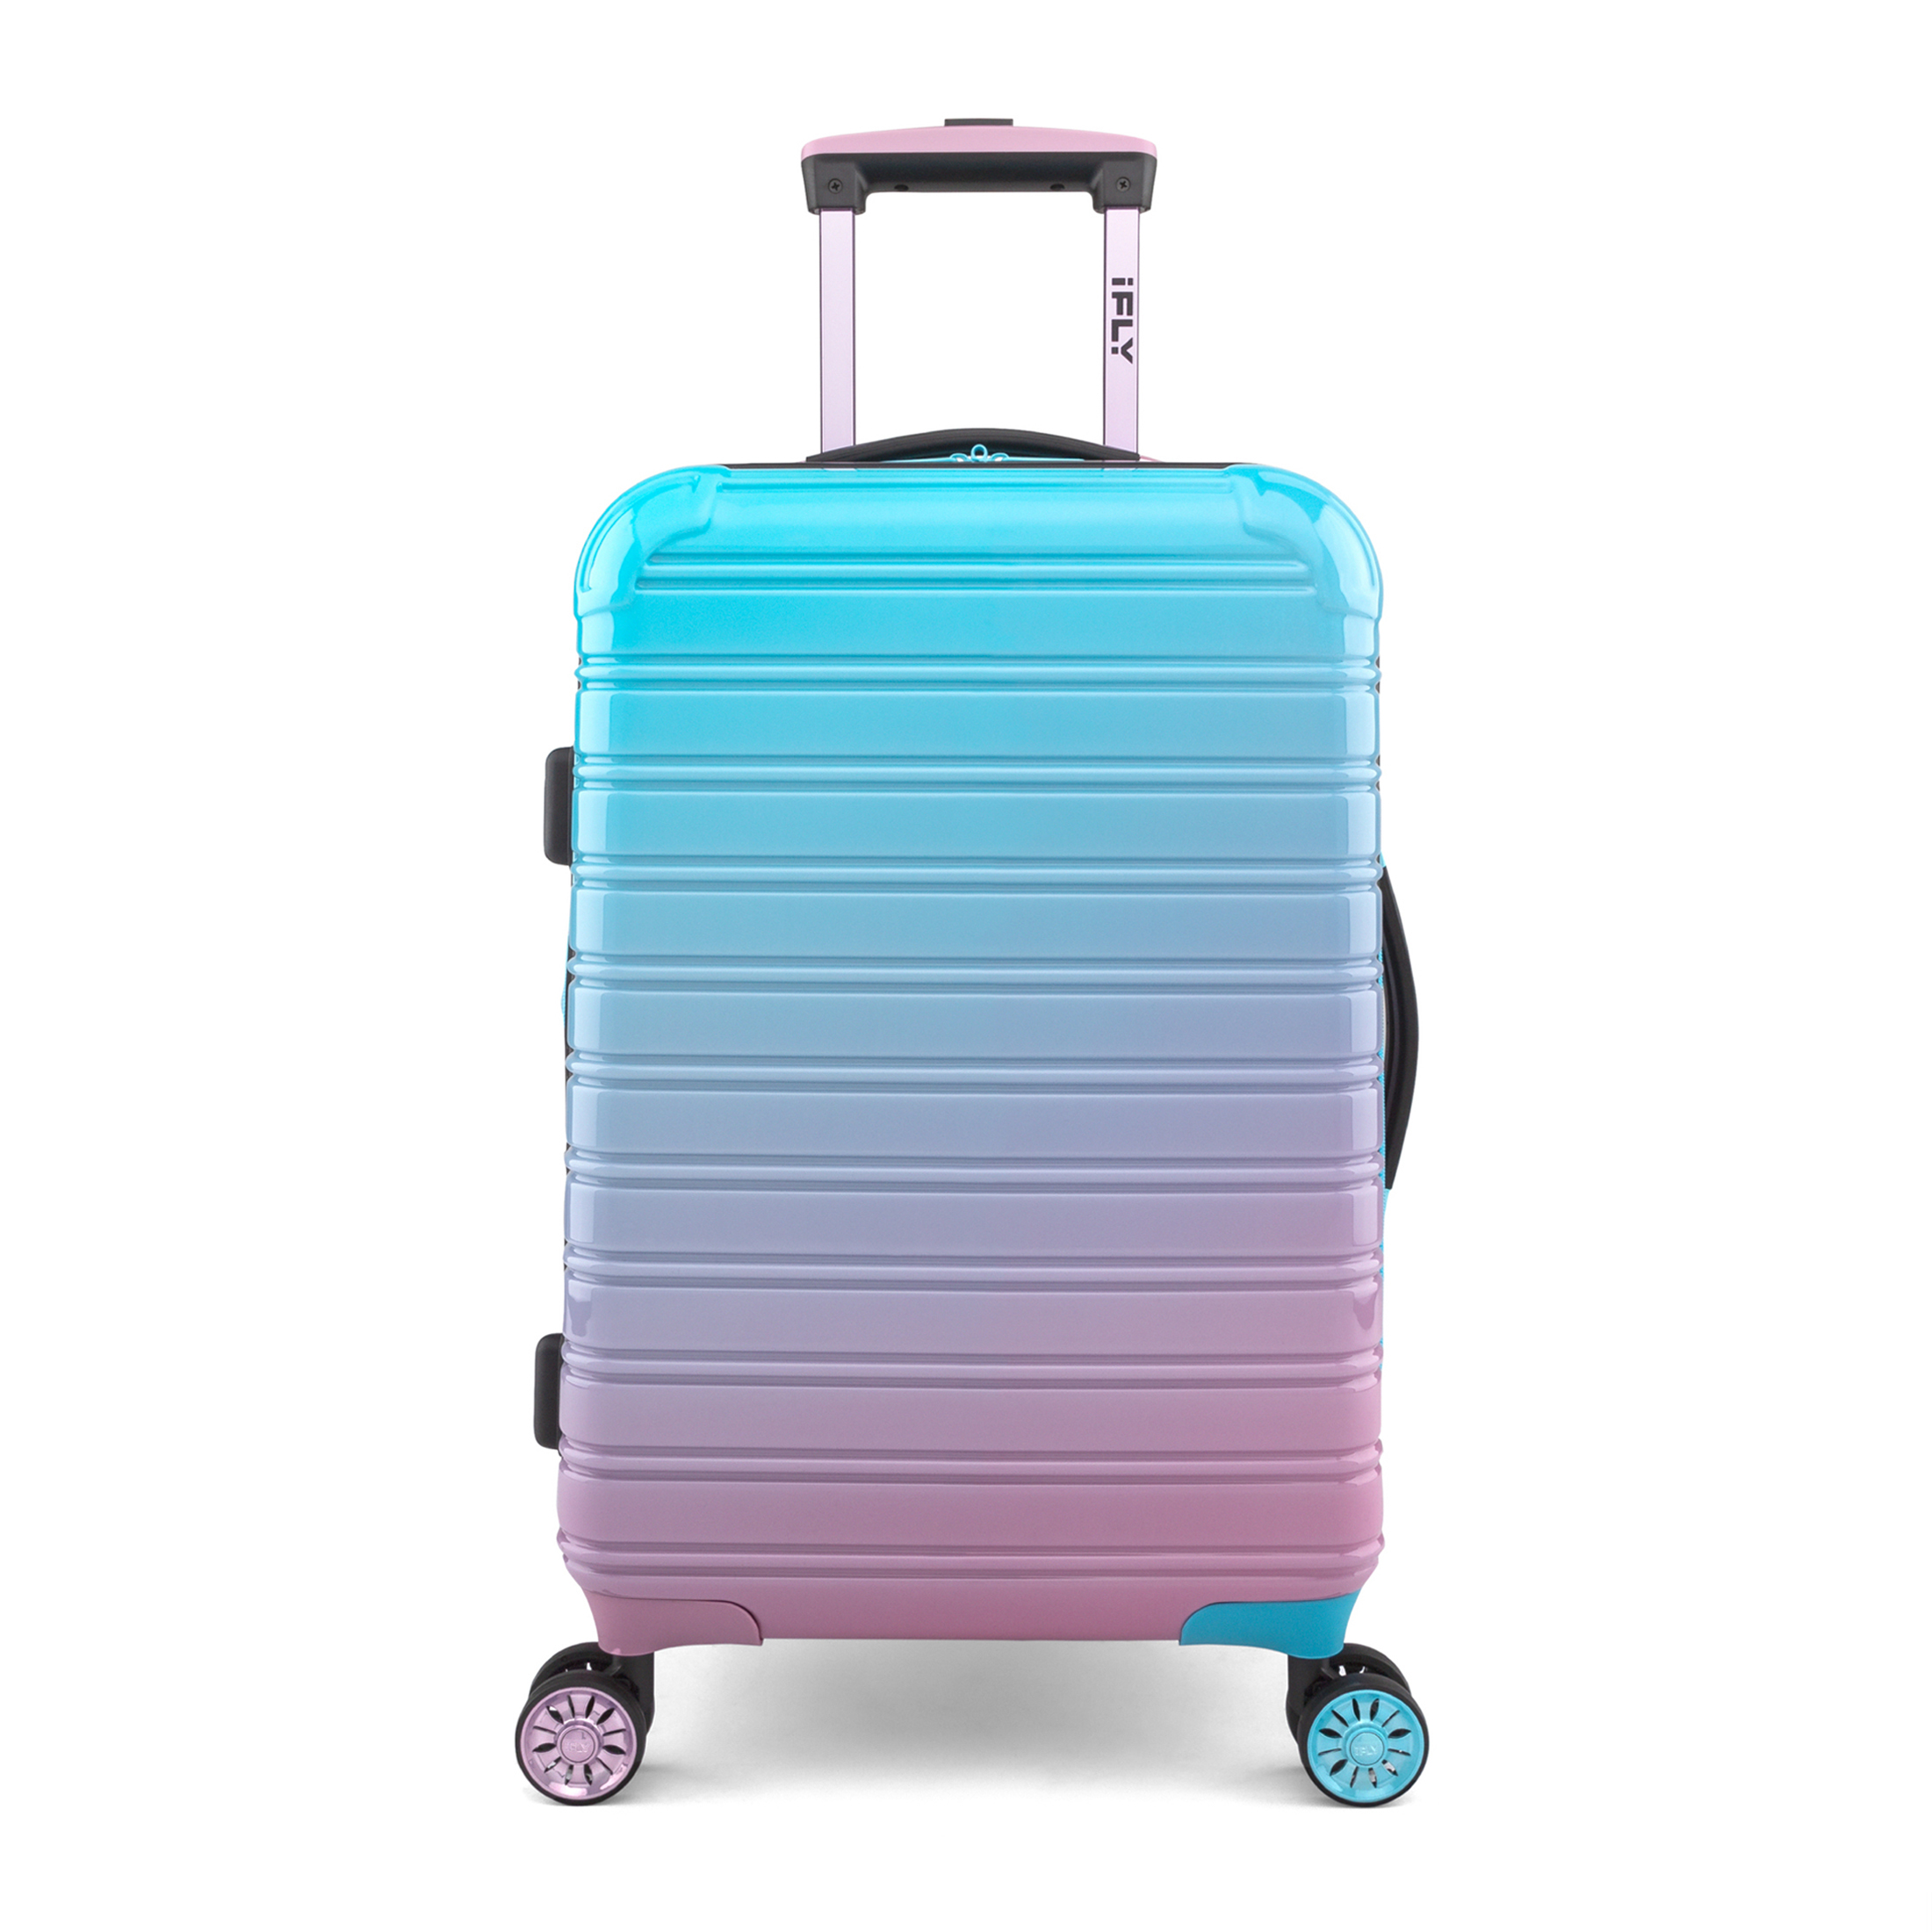 iFLY Hardside Fibertech Luggage 20" Carry-on Luggage, Cotton Candy - image 1 of 10